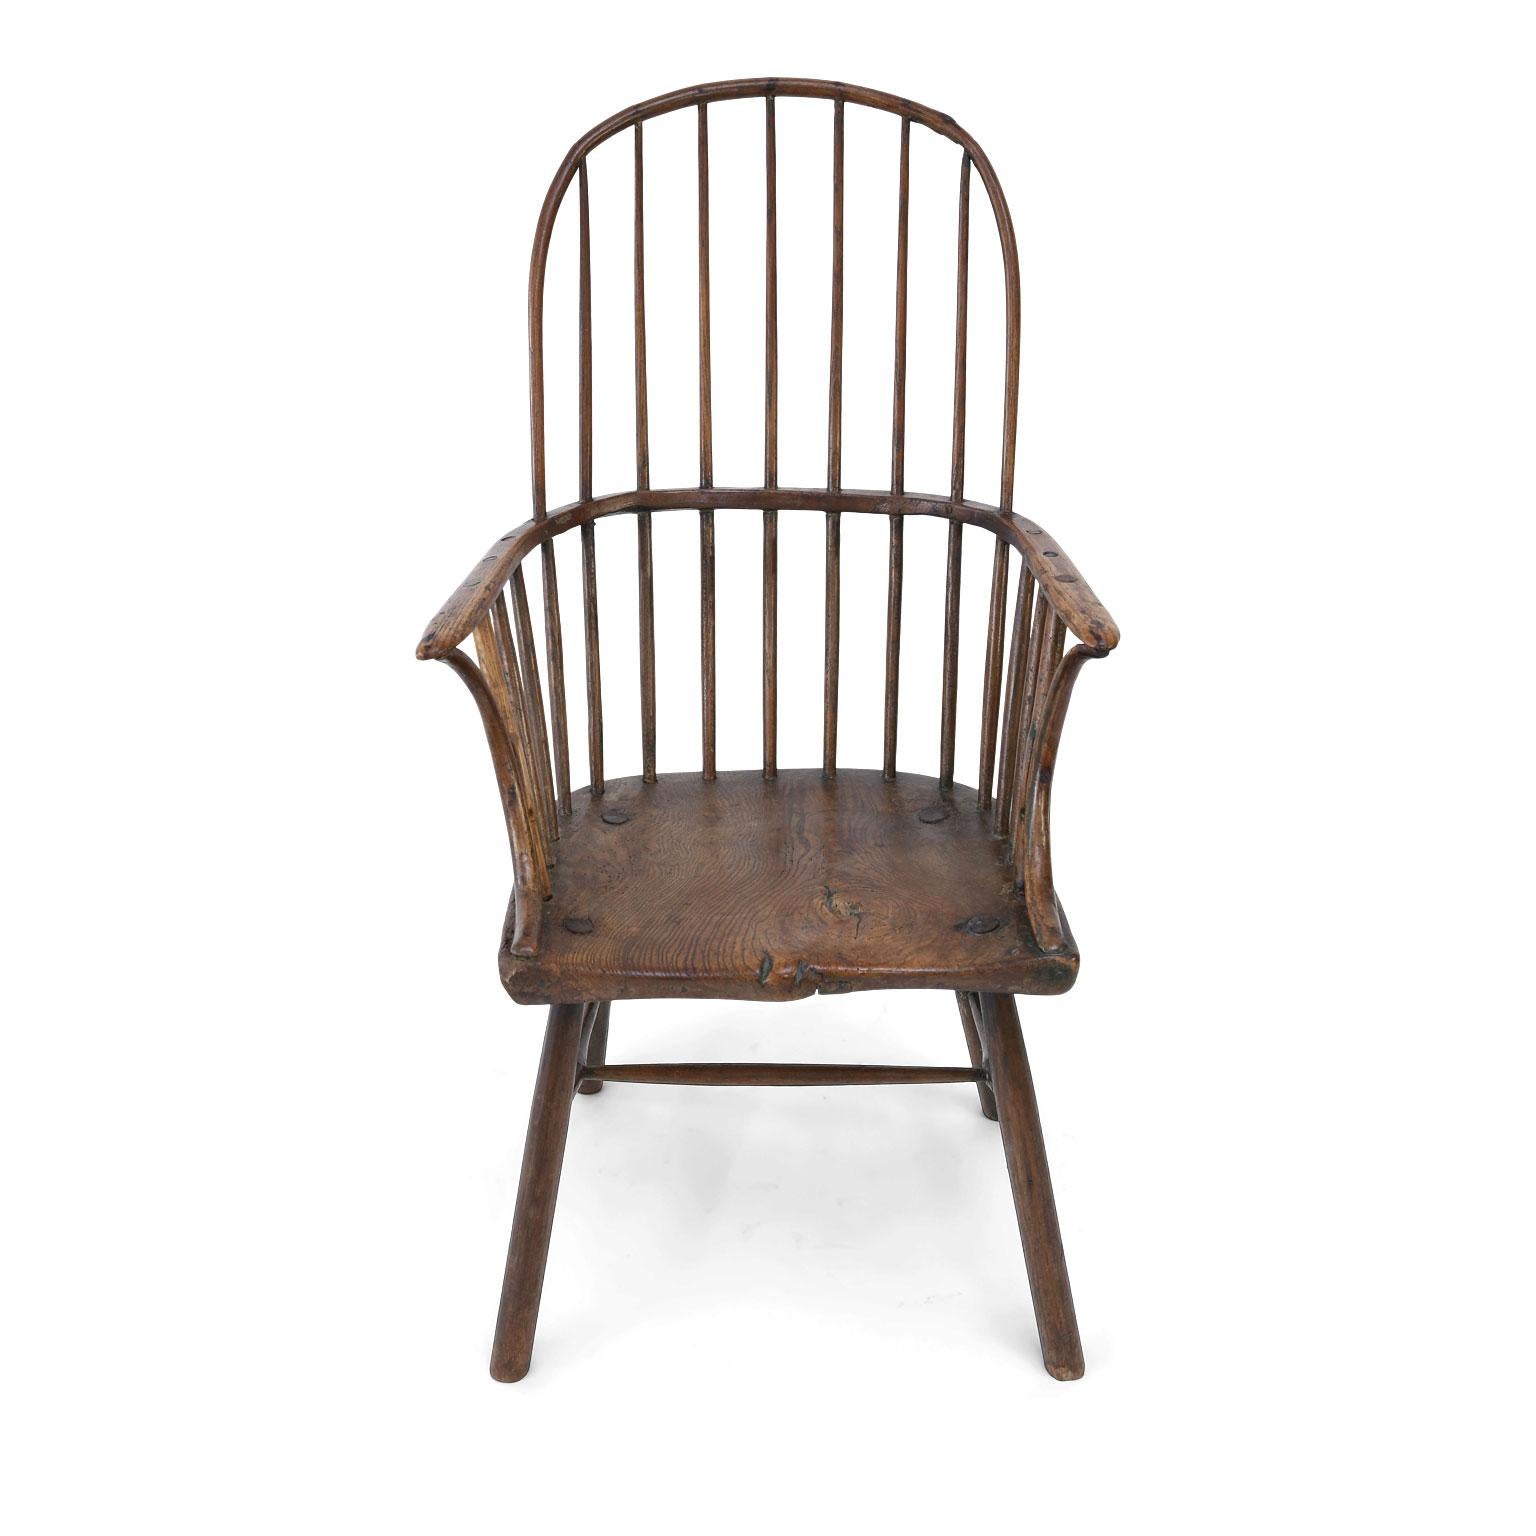 Primitive Cornish Windsor chair (circa 1750-1770) with a thick shaped seat fashioned from a slab of elm, supported by straightforward drawn legs and H-stretcher. Features a simple stick-and-hoop back, with a charming old repair and interesting